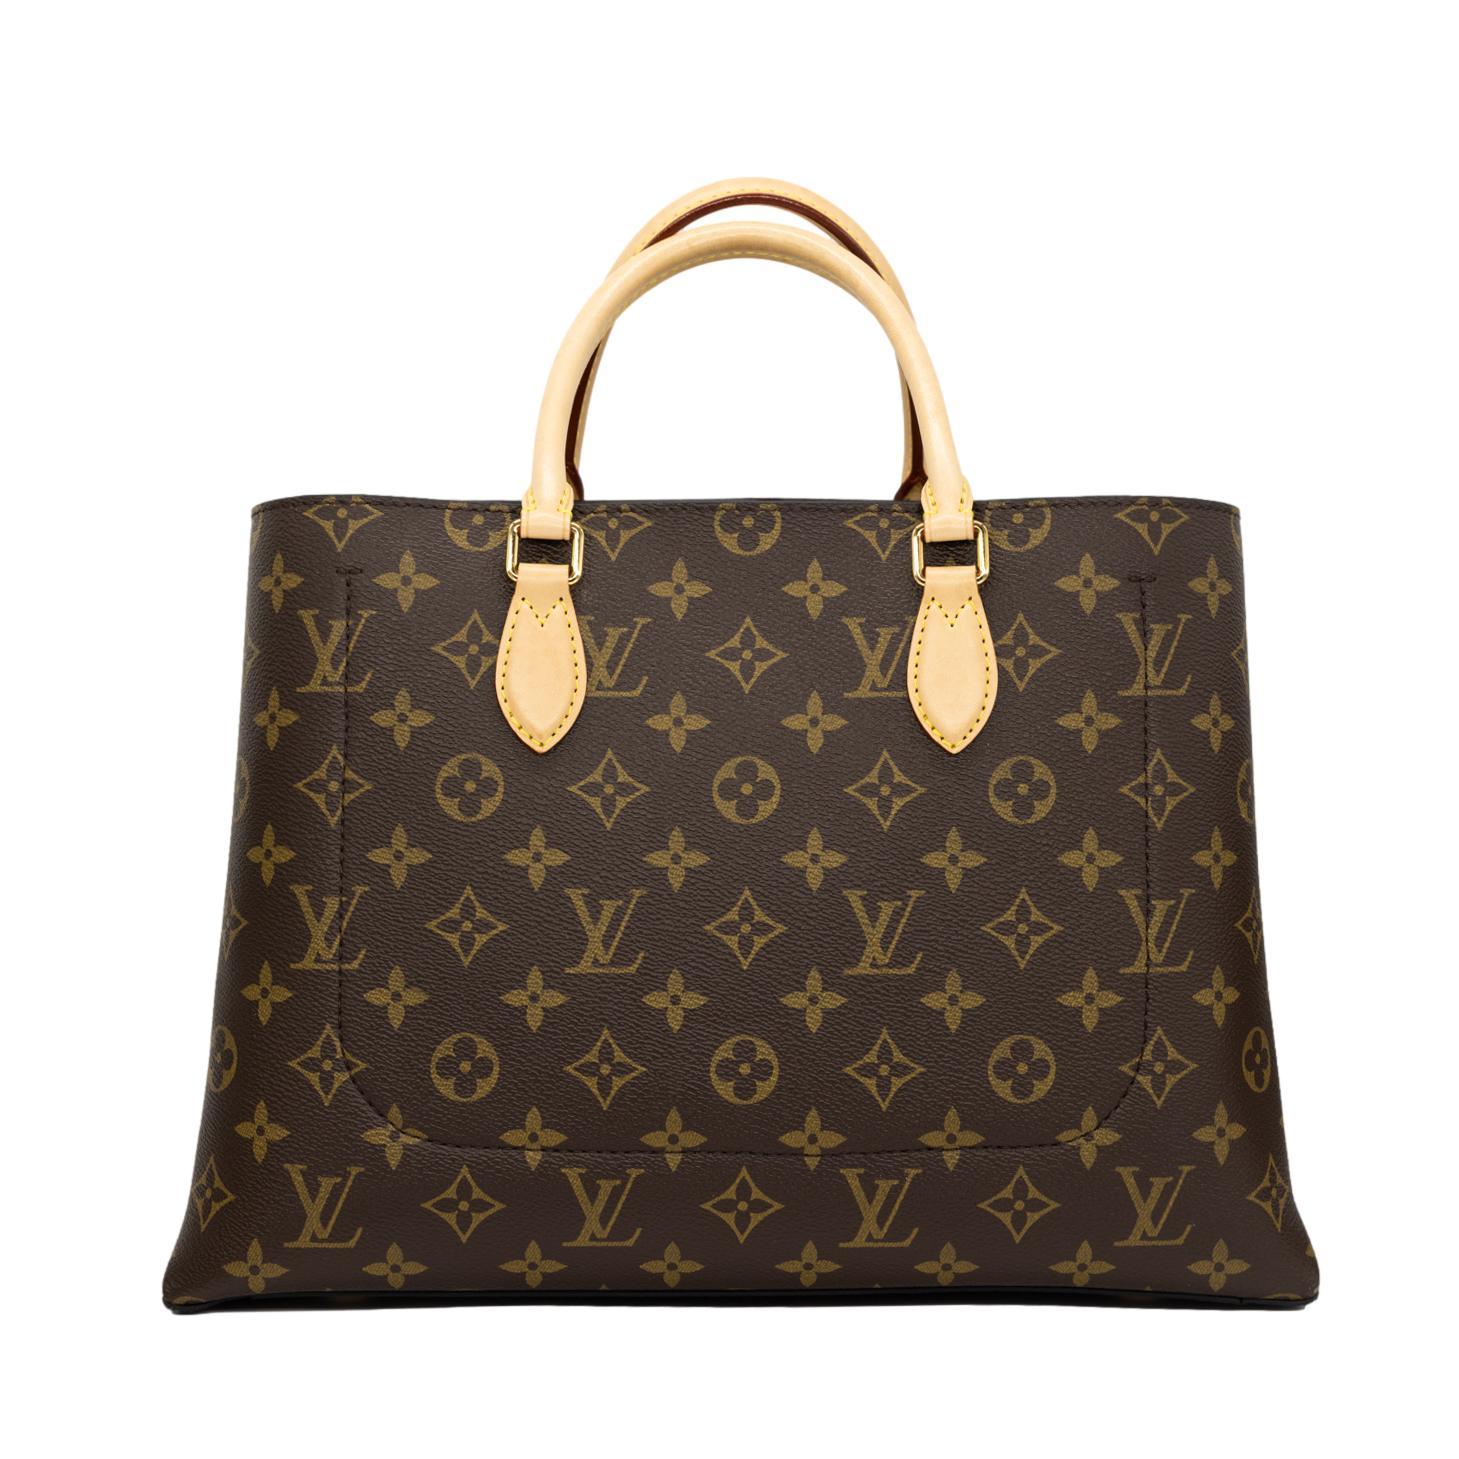 Louis Vuitton Monogram Canvas Flower Tote Top Handle Shoulder Bag, 2018. The Flower bag was introduced in 2018 by creative director Nicolas Ghesquiere and emphasized the famous 